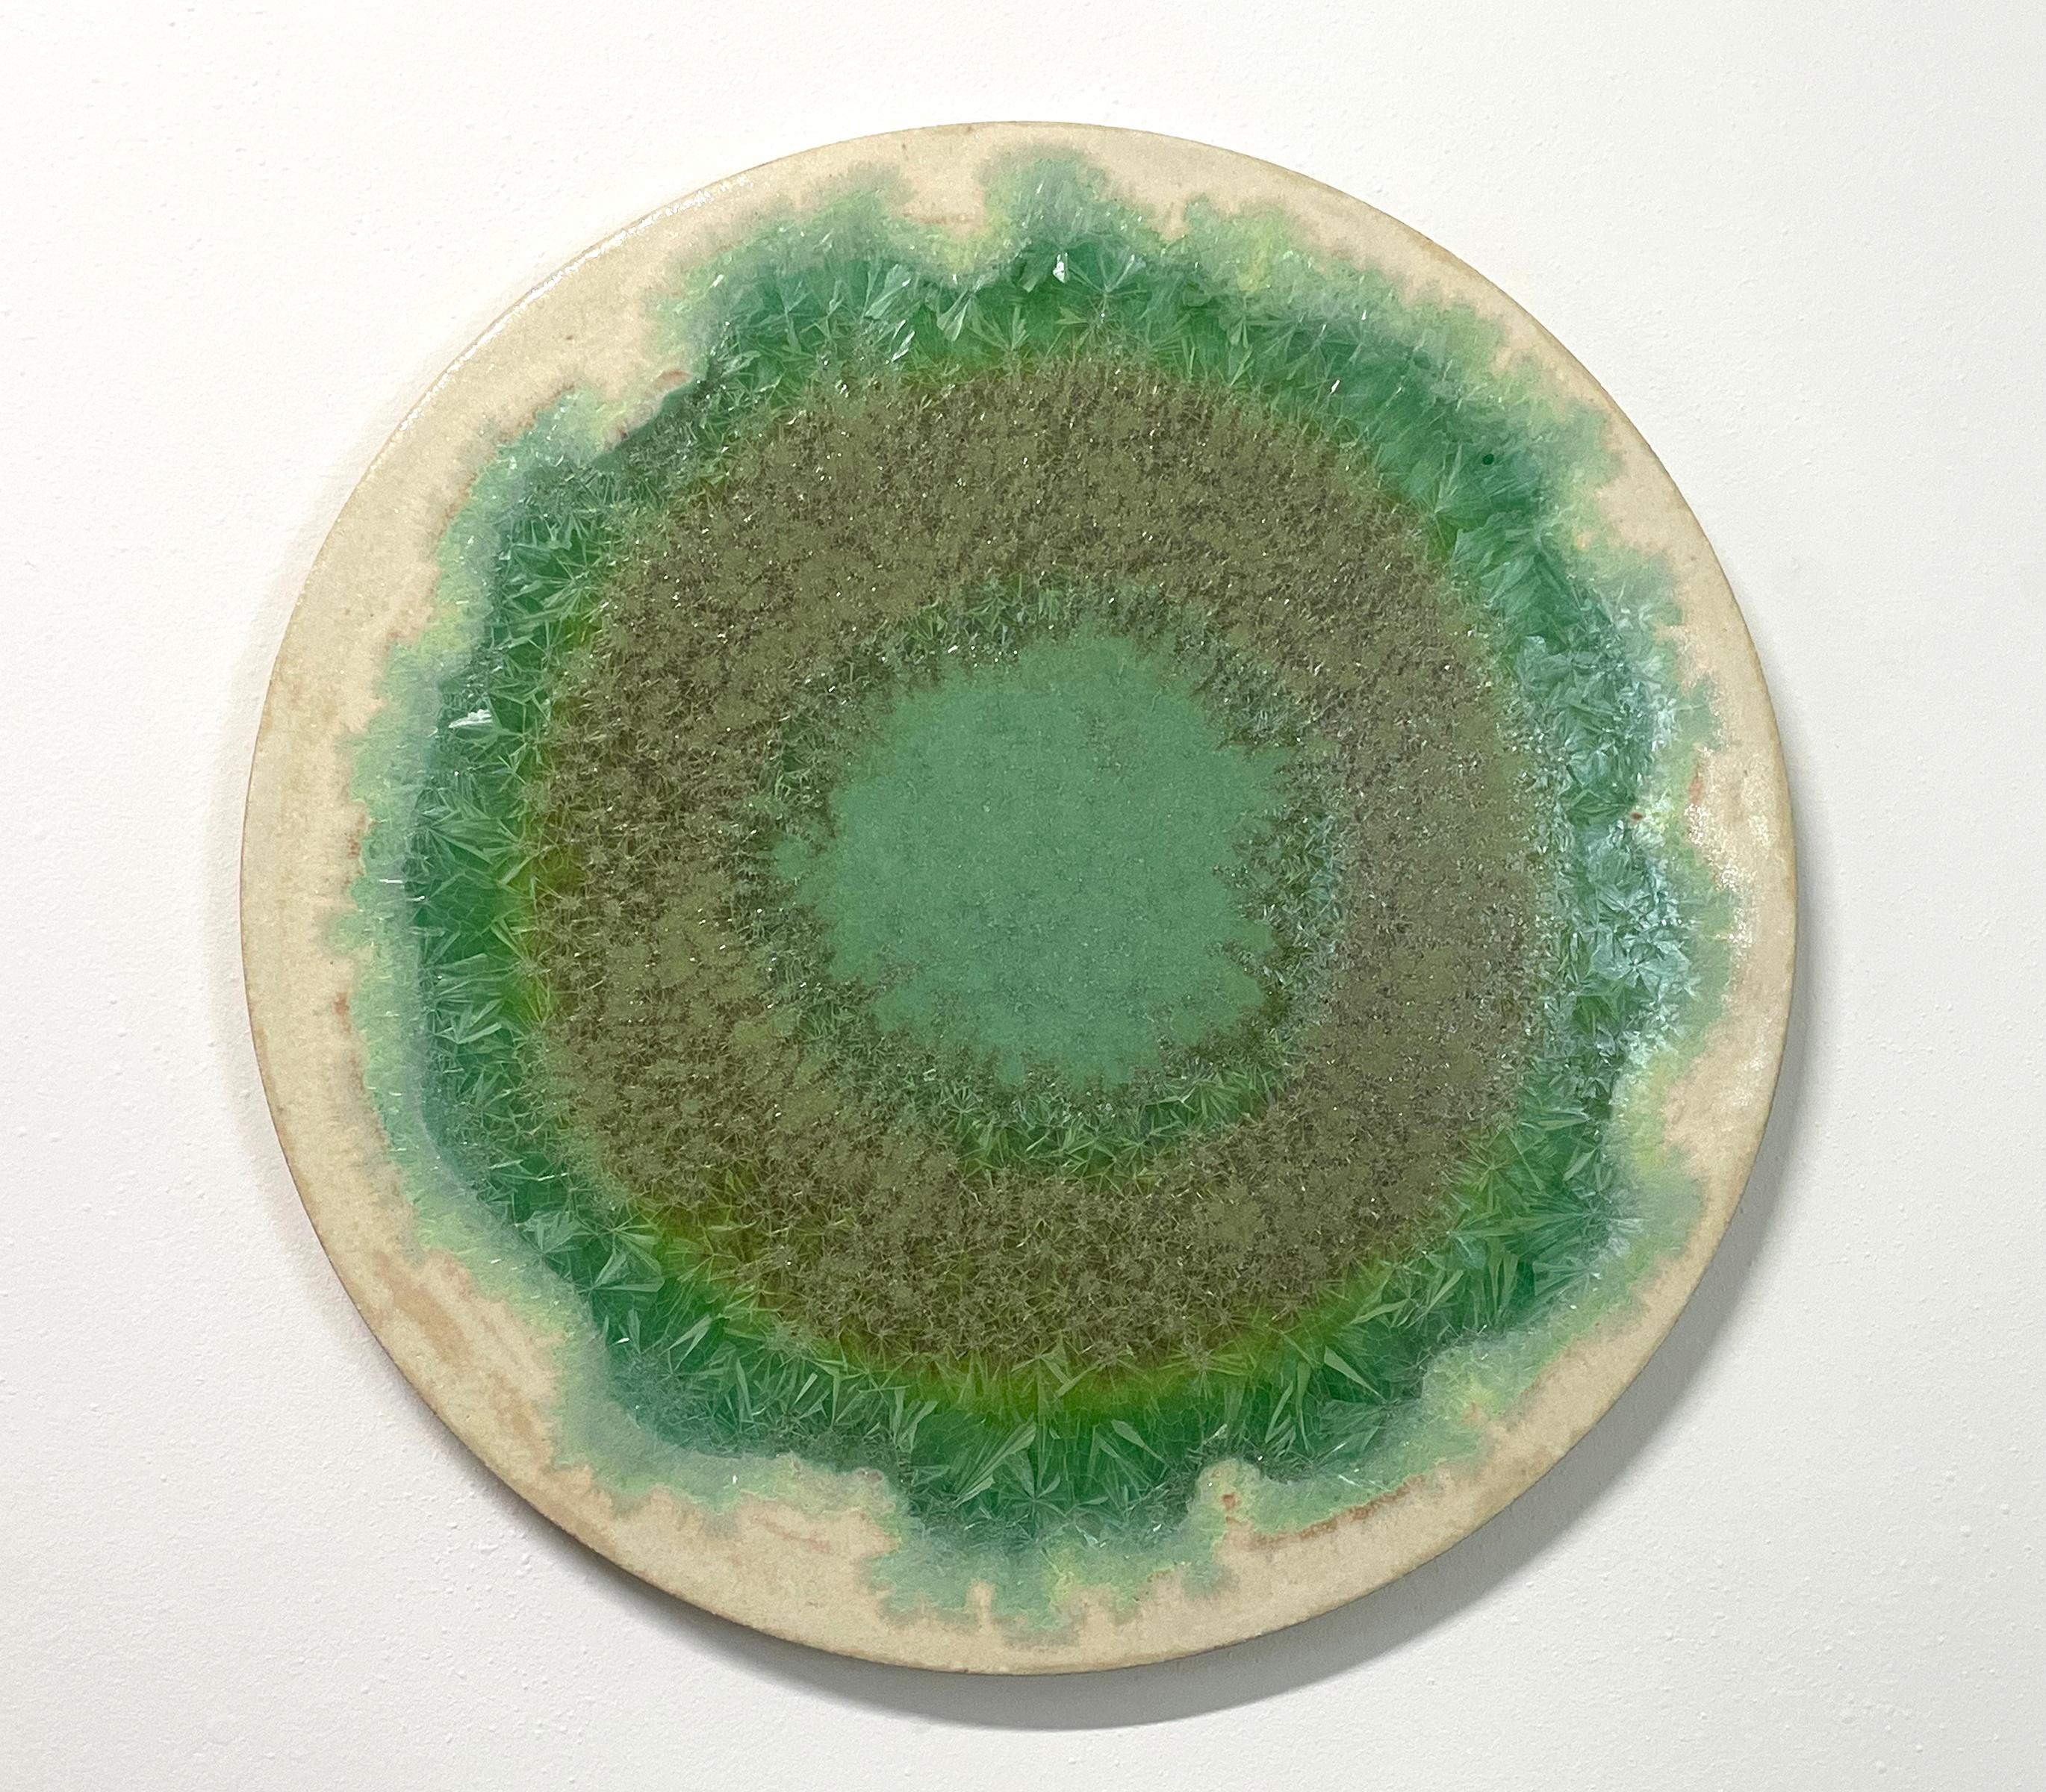 Crystal Halo
Ceramic crystal glaze painting by William Edwards
Hand rolled earthenware circular slab with crystal glaze. 

William received his BFA in sculpture from the historic San Francisco Art Institute and his MFA from UC Davis. William